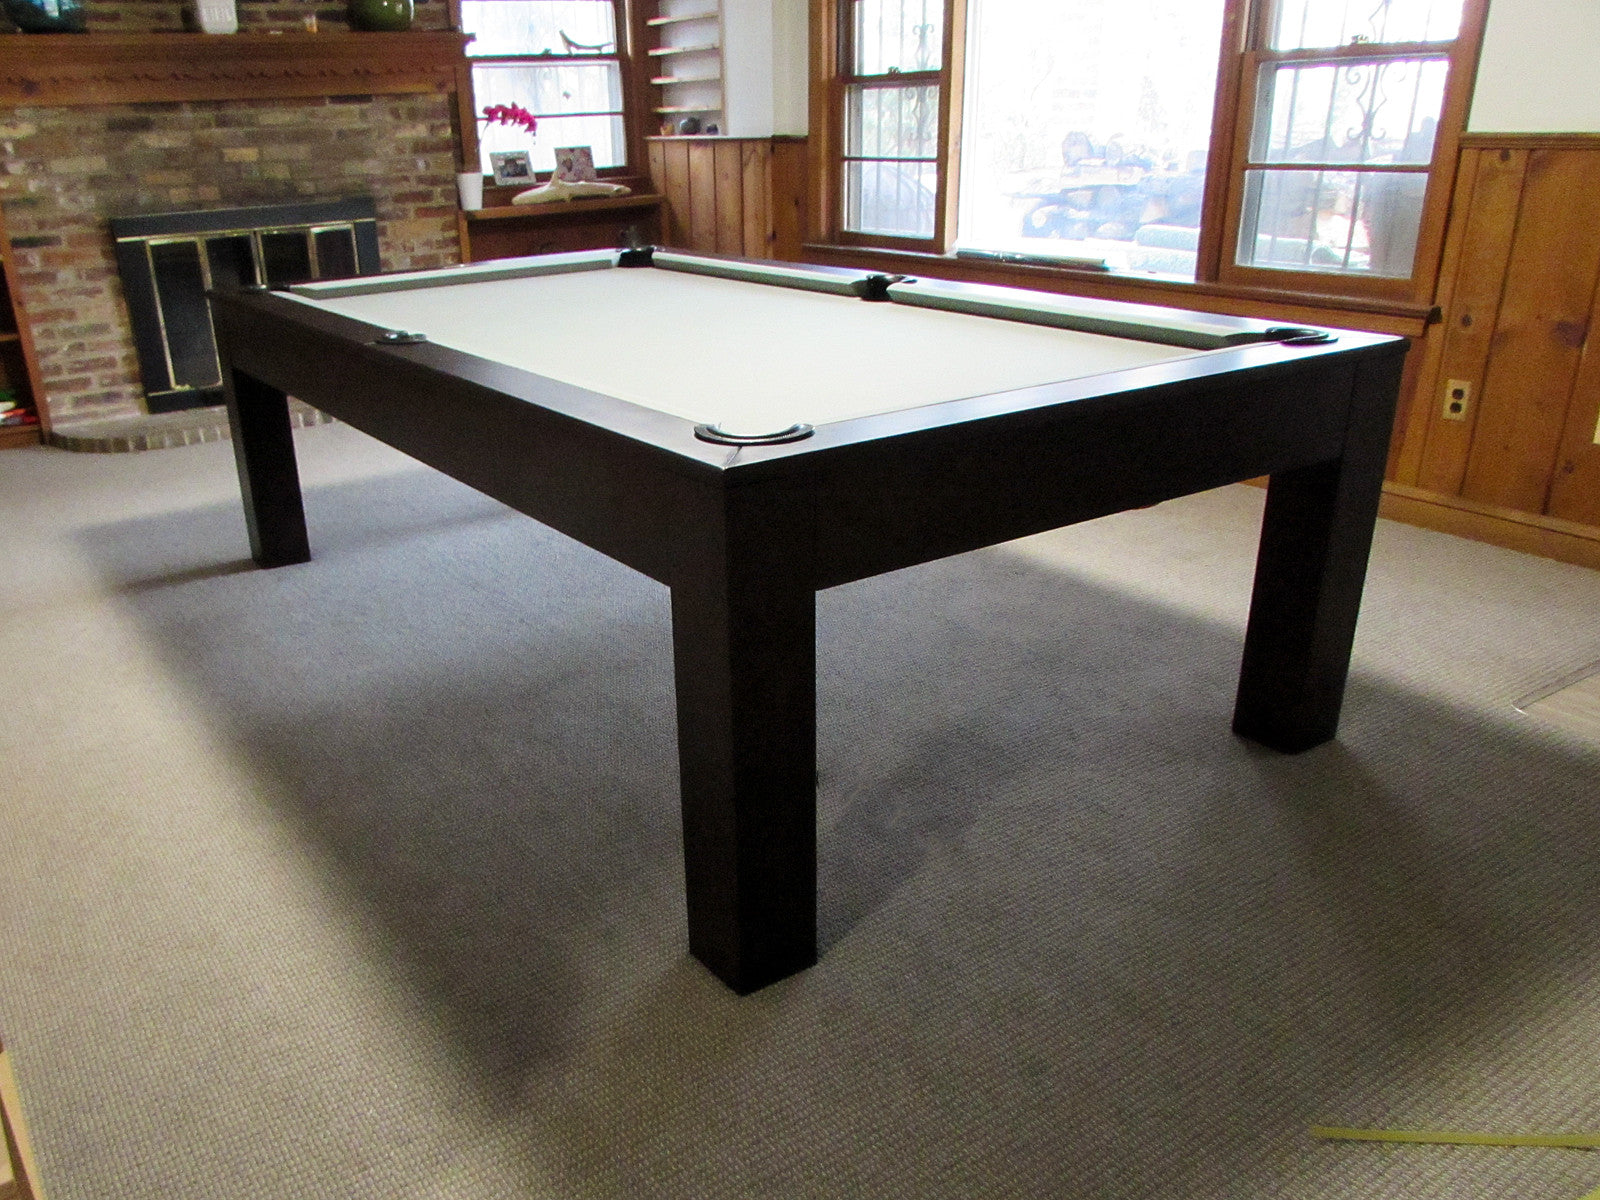 Robbies Billiards Dining Pool Table Delivered to Arlington Virginia